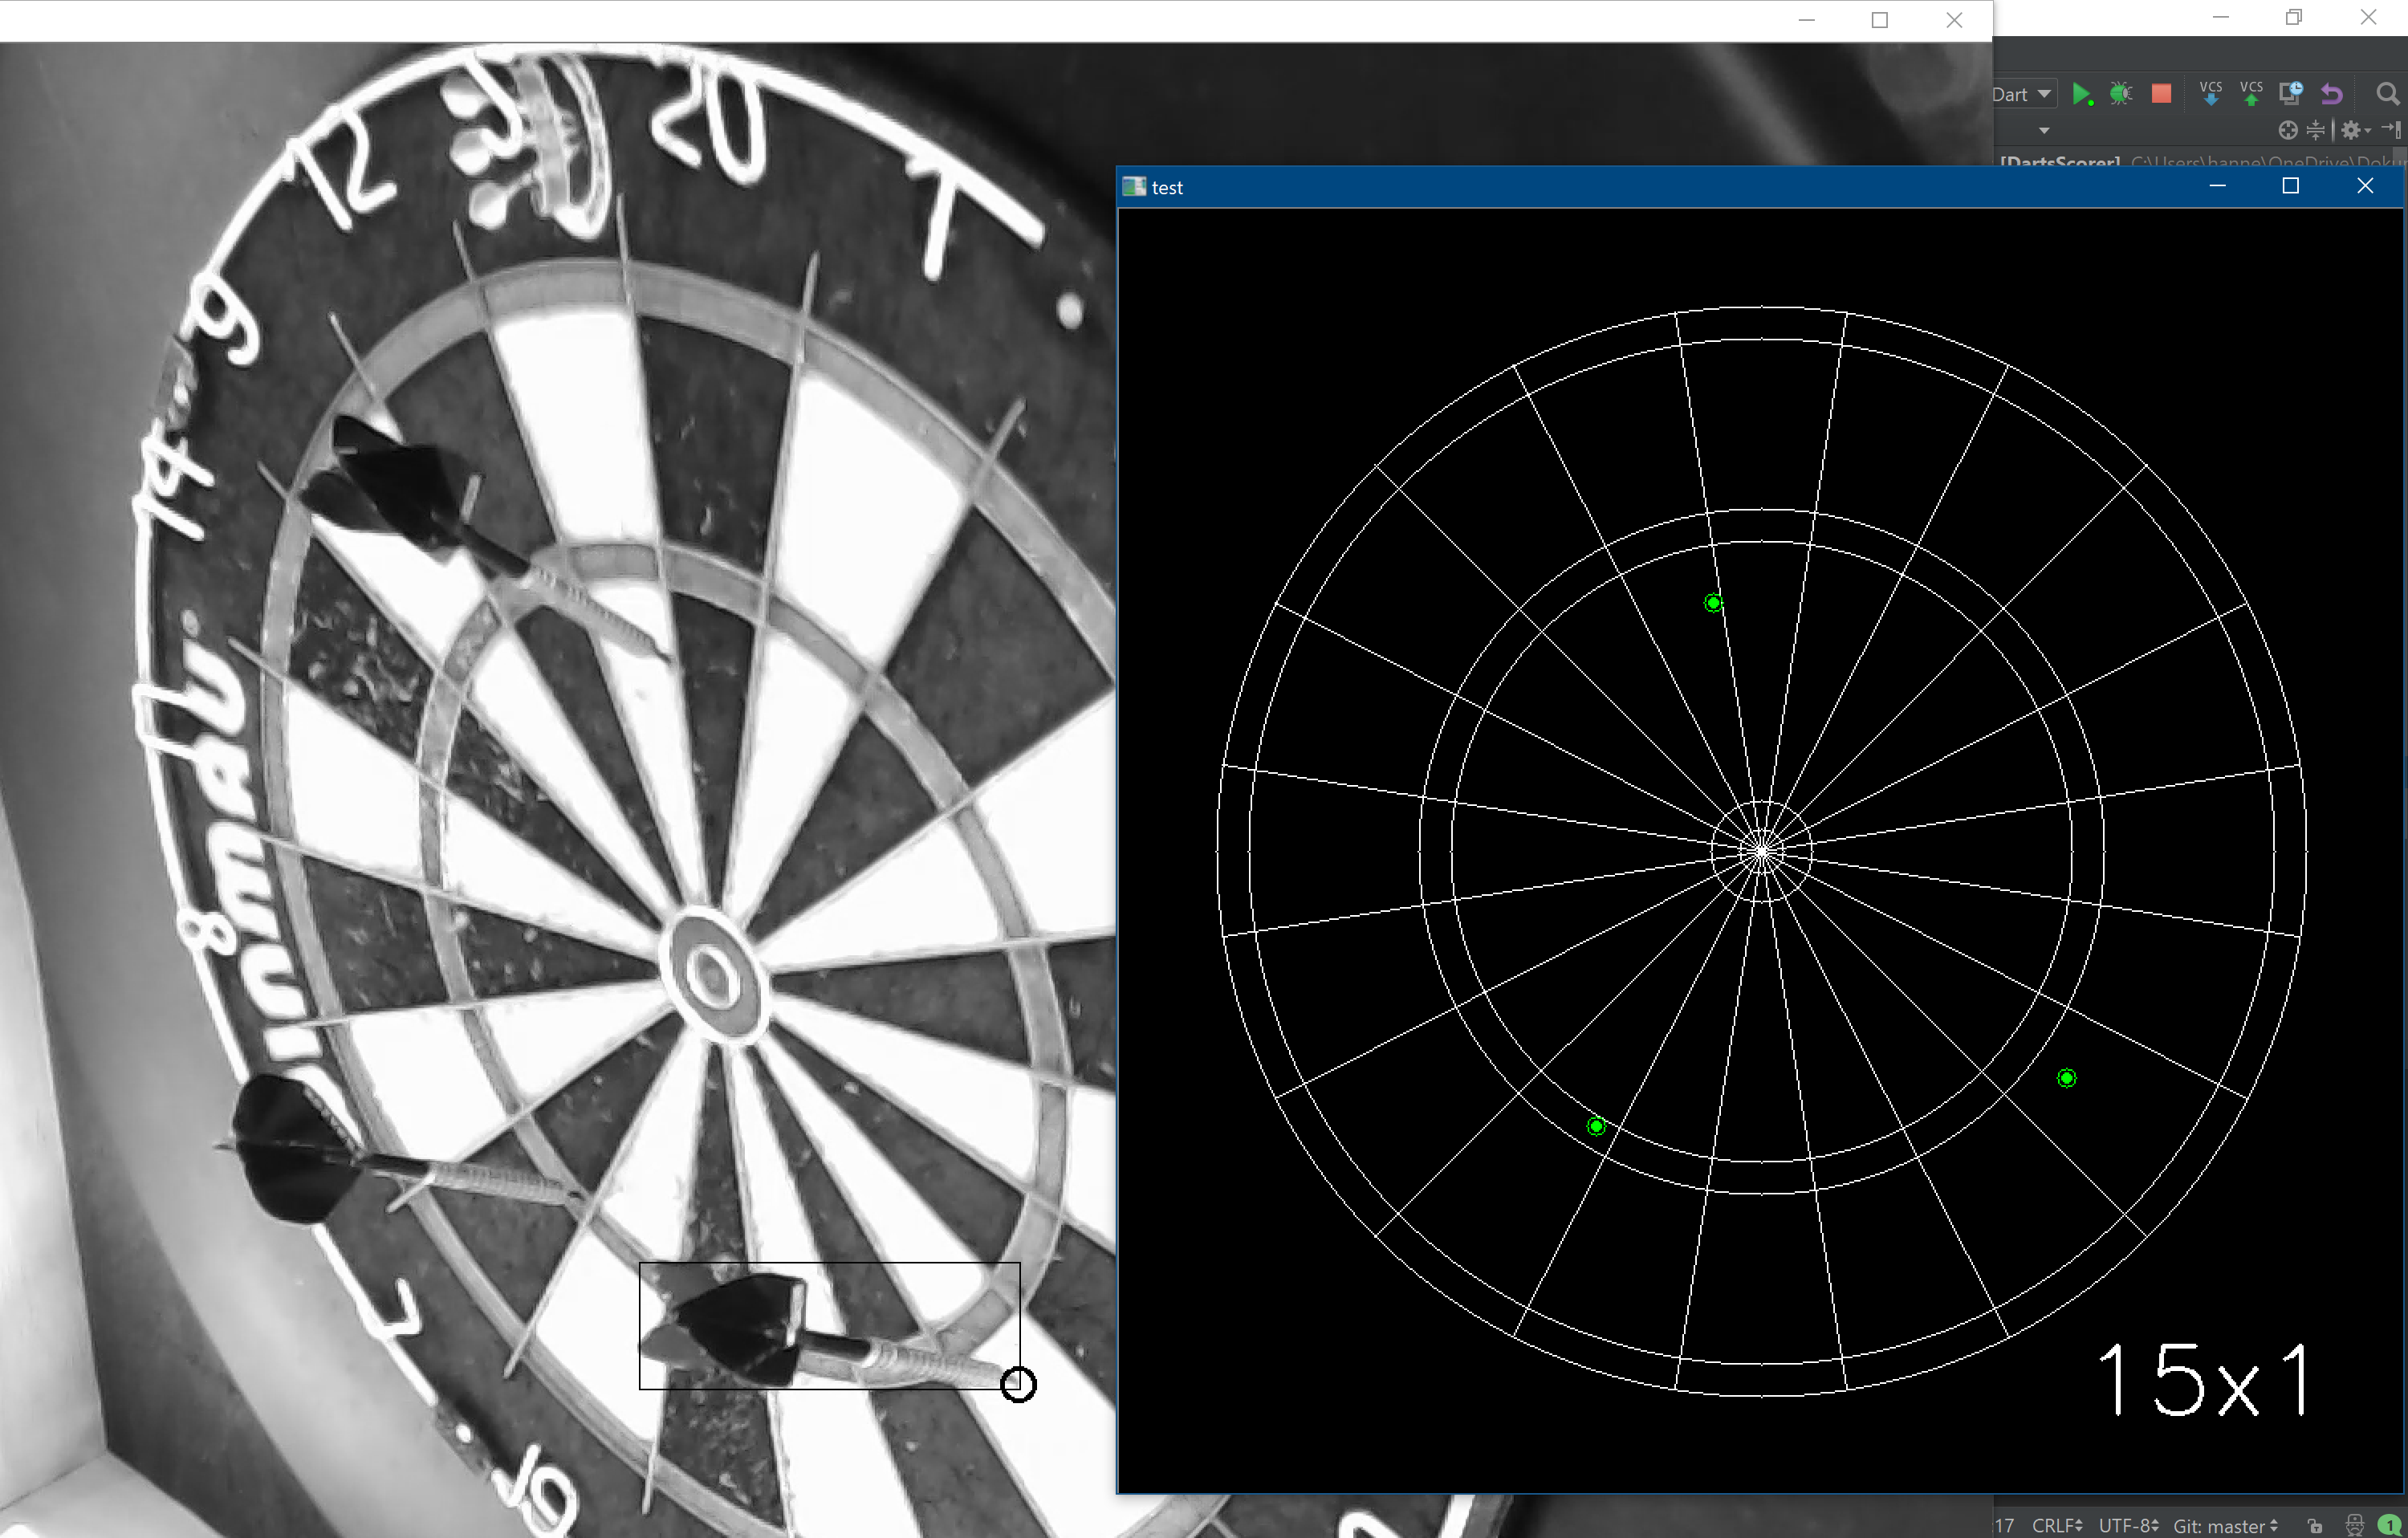 opencv-steel-darts Automatic scoring system for steel darts using OpenCV, a Raspberry Pi 3 Model B and two webcams.